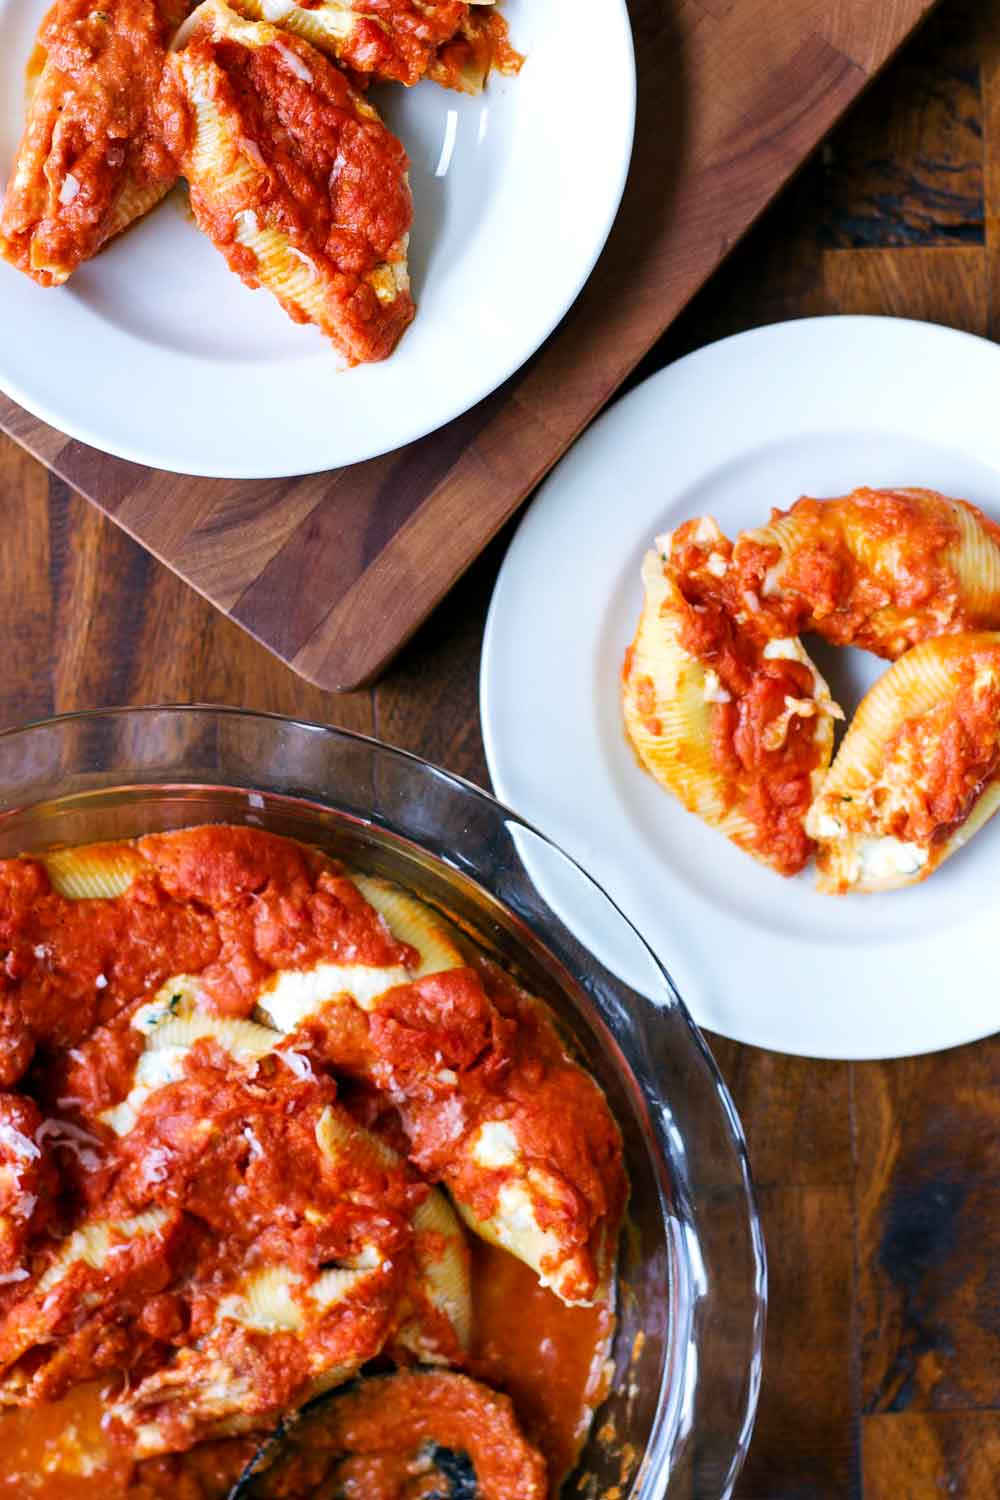 Baked stuffed shells in a baking dish with two white plates with one serving each